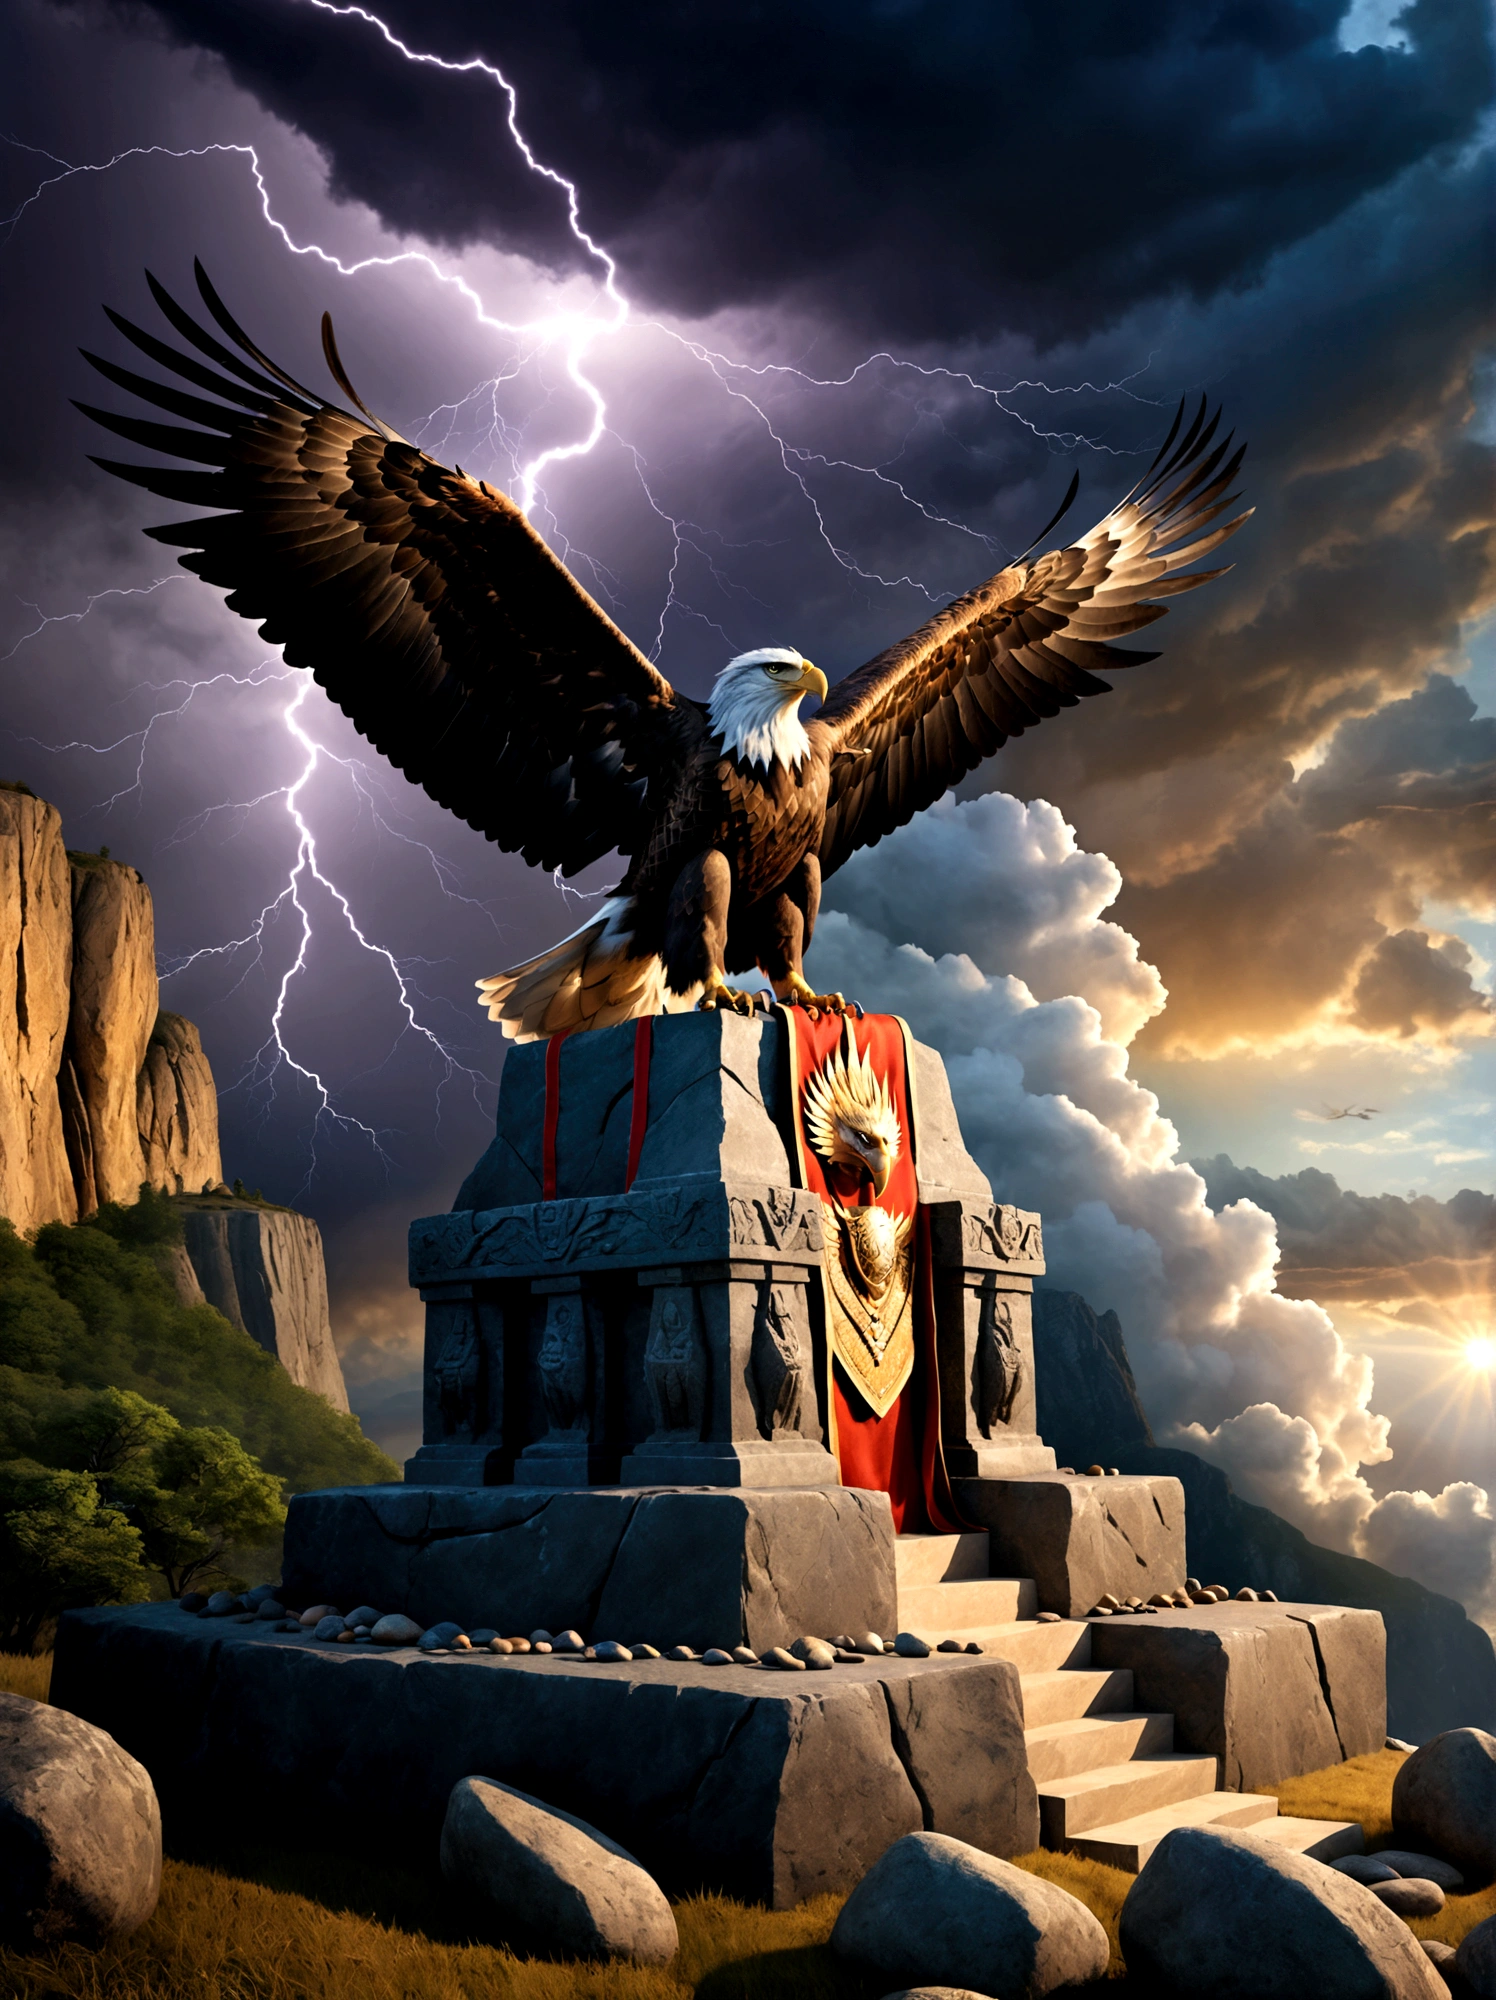 Illustrate a conceptual scene signifying power, Visualize an ancient stone throne, situated at the peak of a soaring cliff, The sky behind the throne anticipates an impending storm, and the wind forcefully sweeps the cliff, tossing loose rocks aside. An eagle, symbol of strength and majesty, soars above the throne, Lightning strikes in the distant horizon complete the scene, This scene symbolizes strength, leadership, and dominance, embodying the abstract concept of power